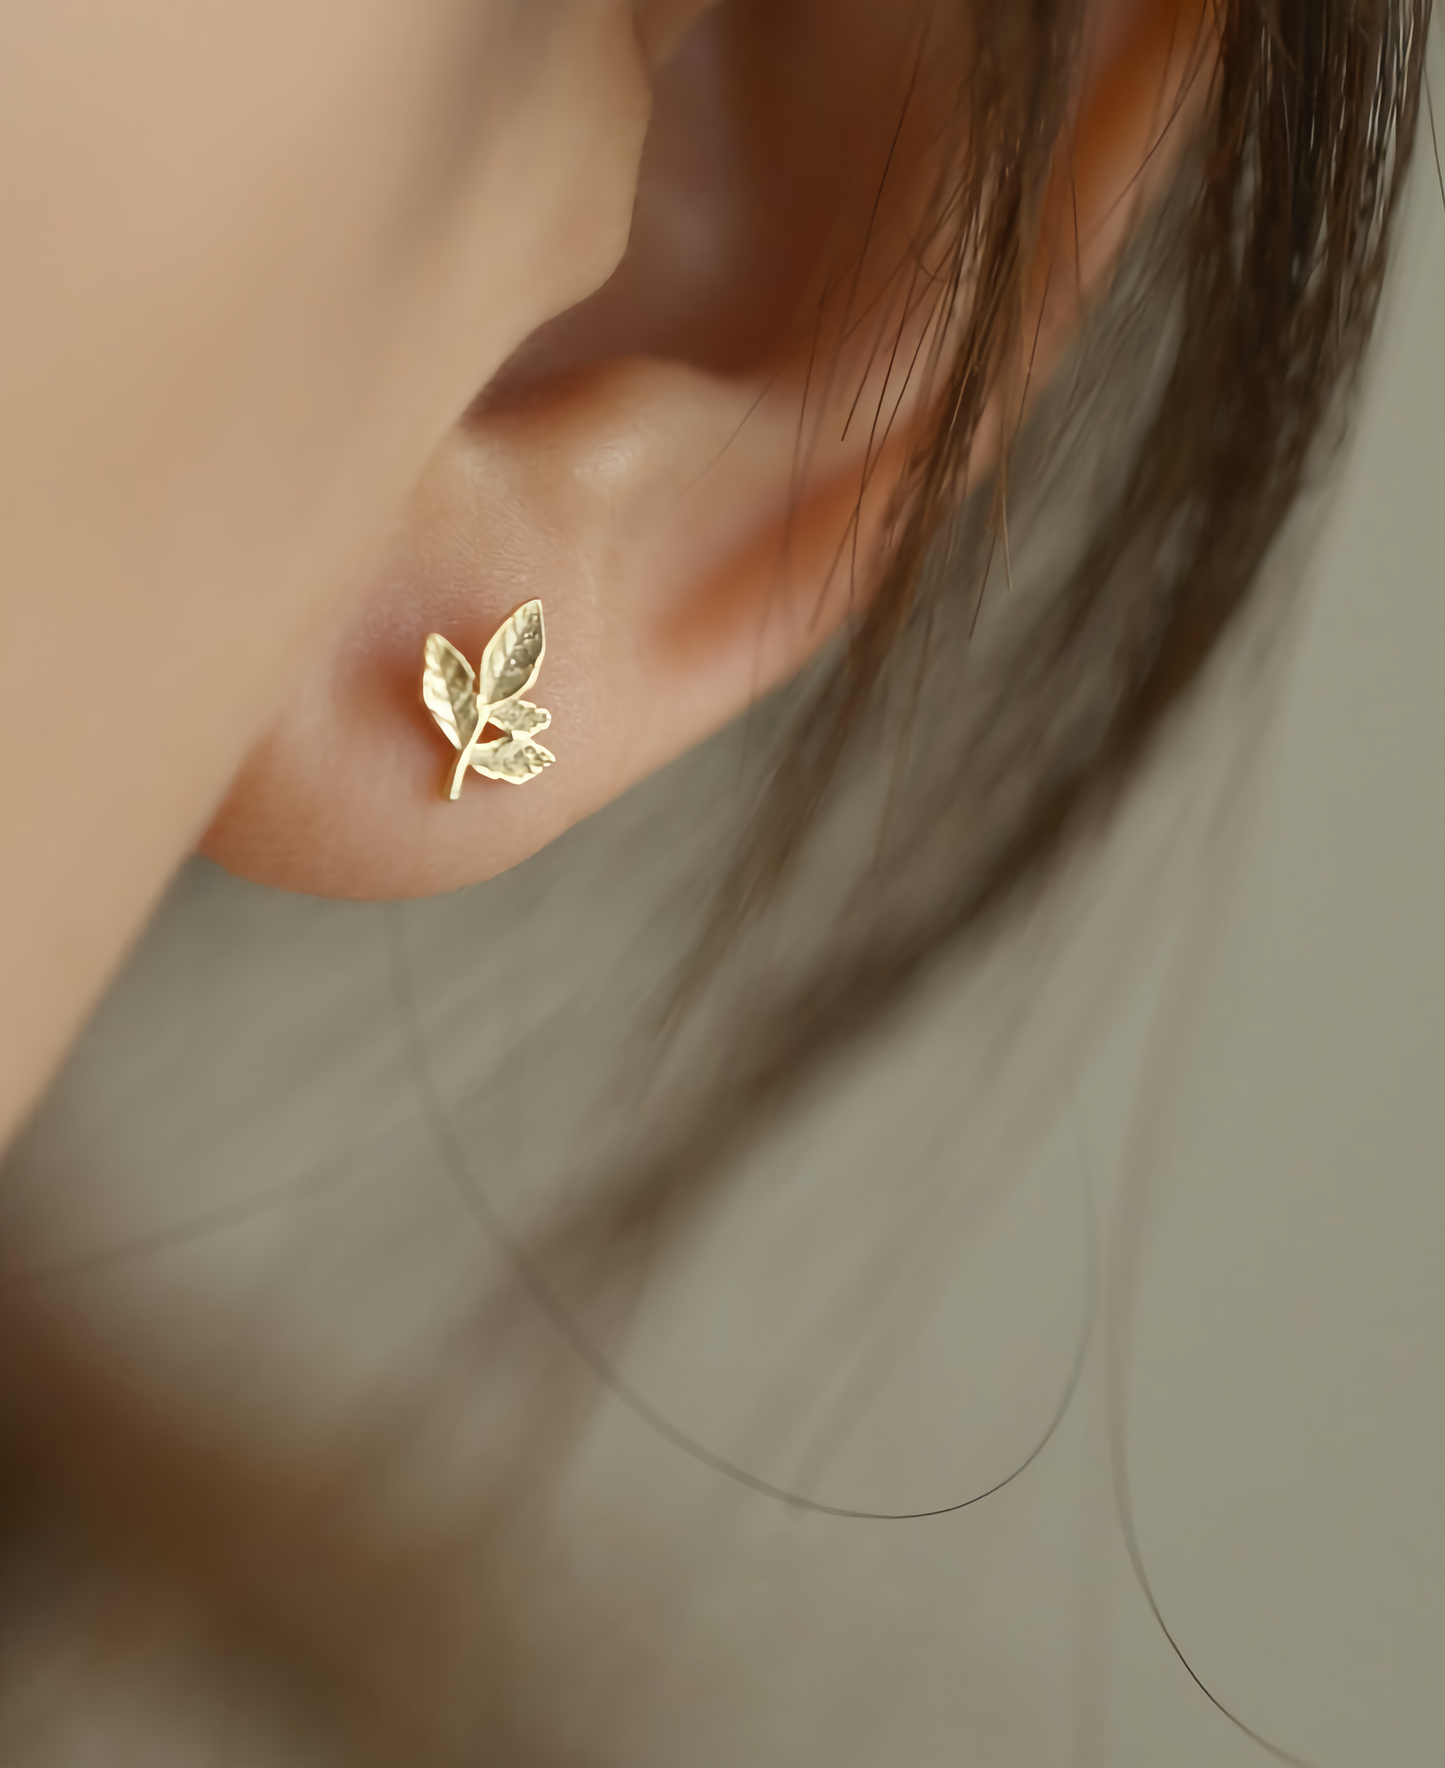 Autumn Leaf Earring Studs - 9ct Solid Gold